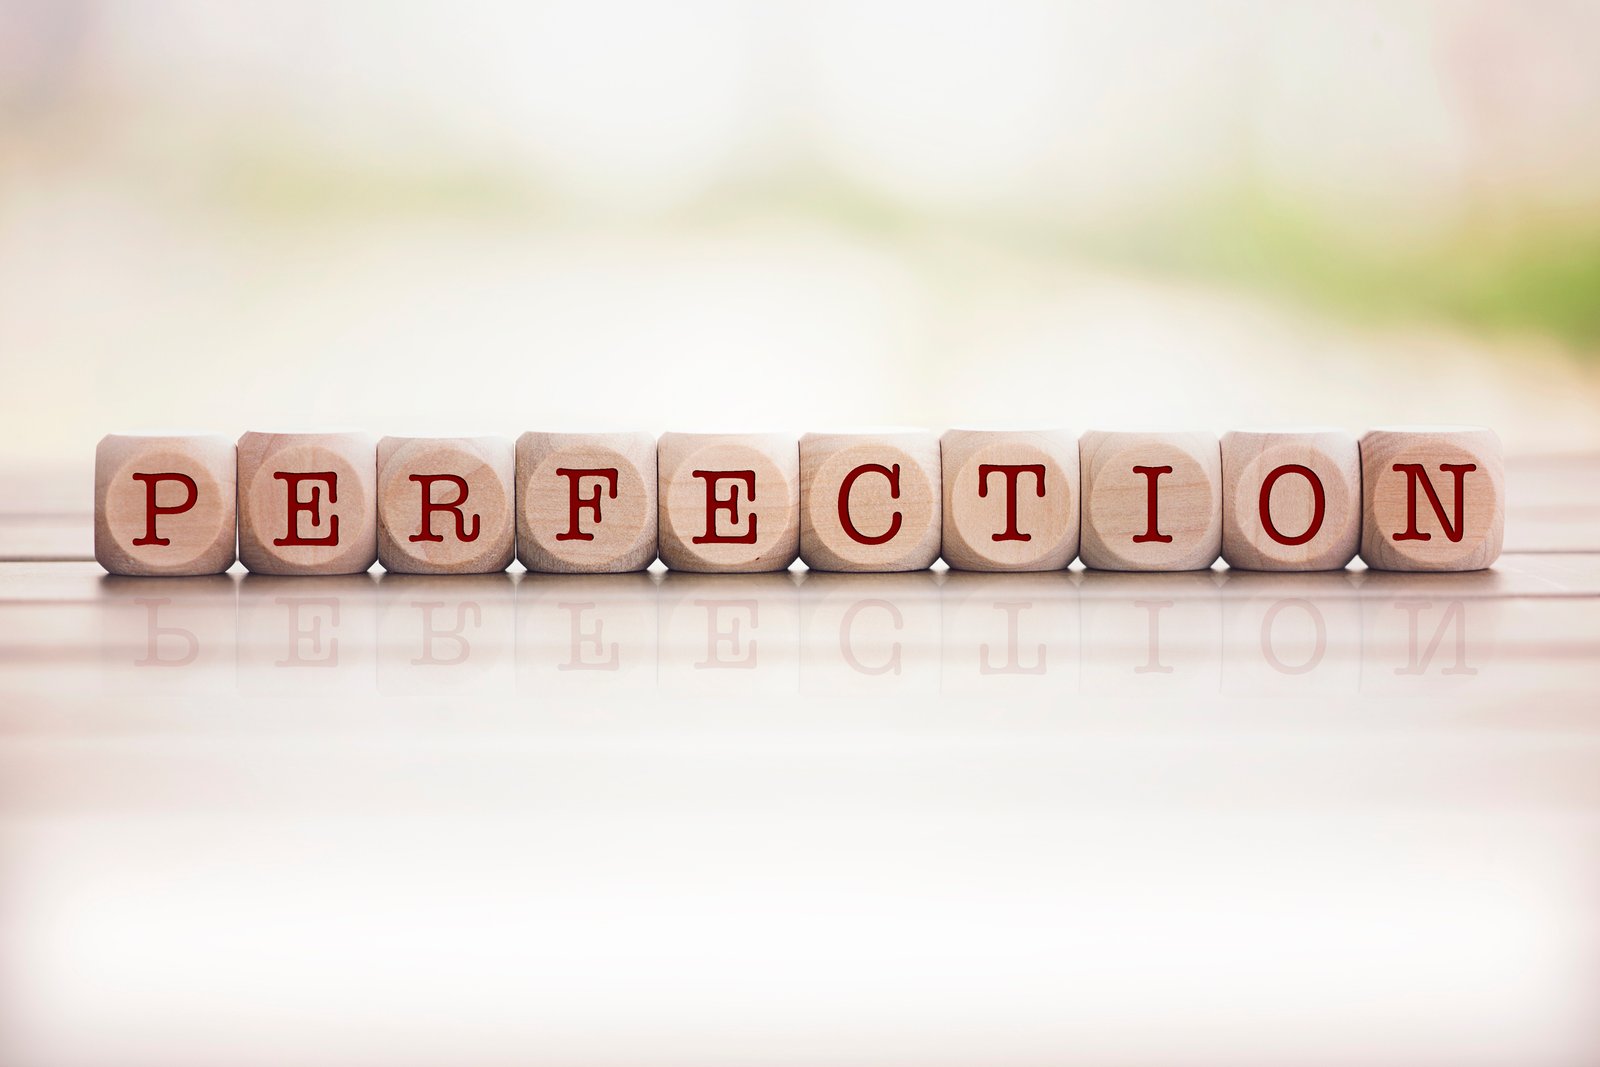 Perfection word written on cube wooden blocks. Defocused background.